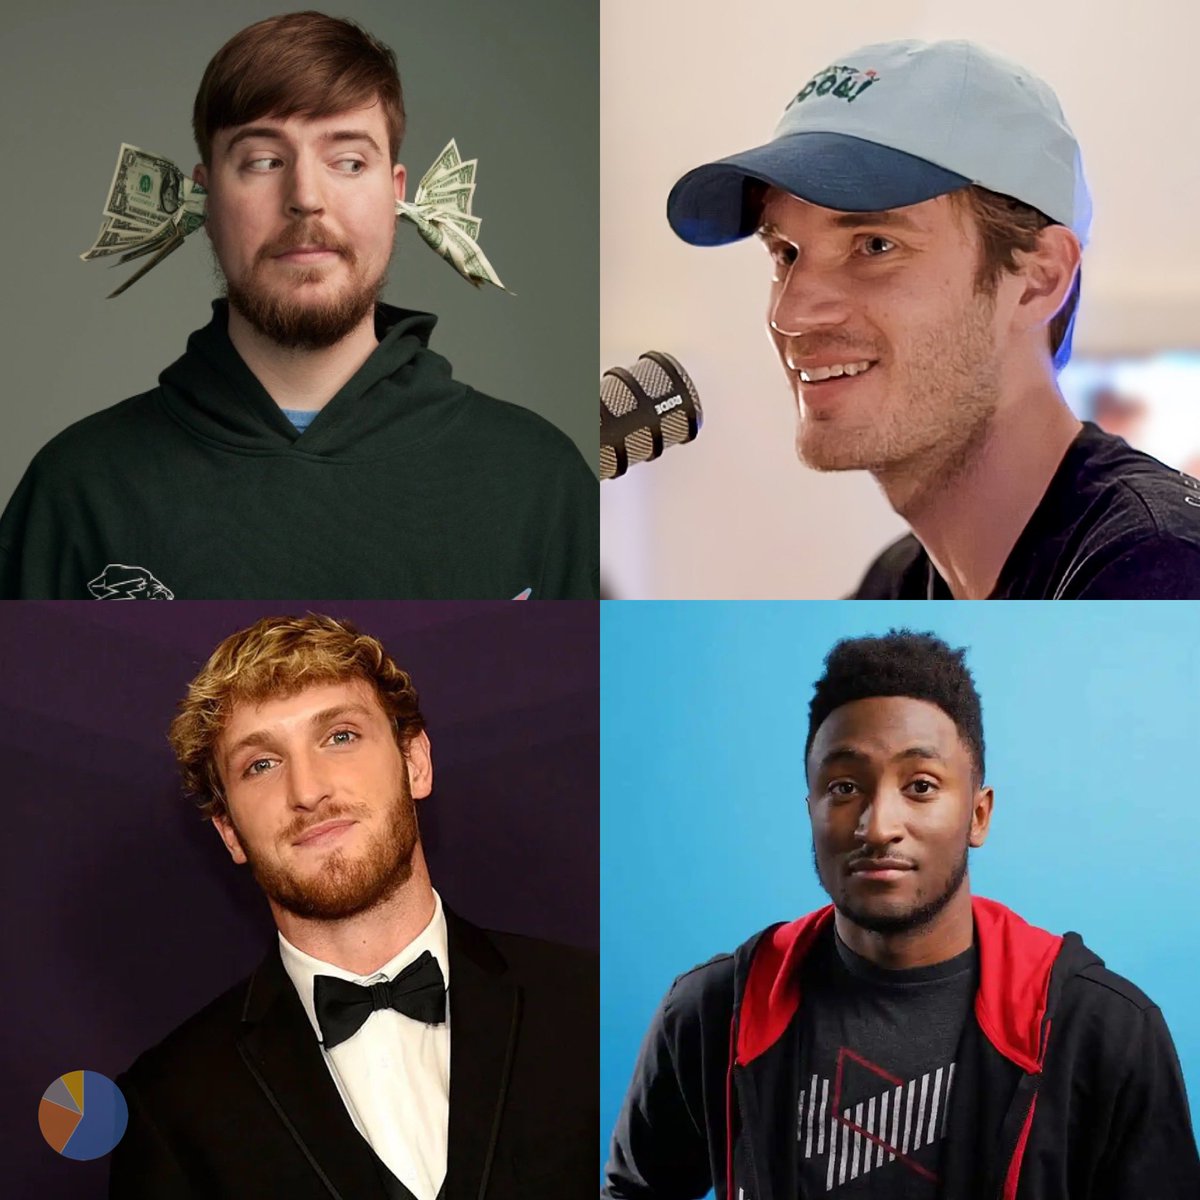 Who is the most influential YouTuber of all time? 1. MrBeast 2. Pewdiepie 3. Logan Paul 4. MKBHD